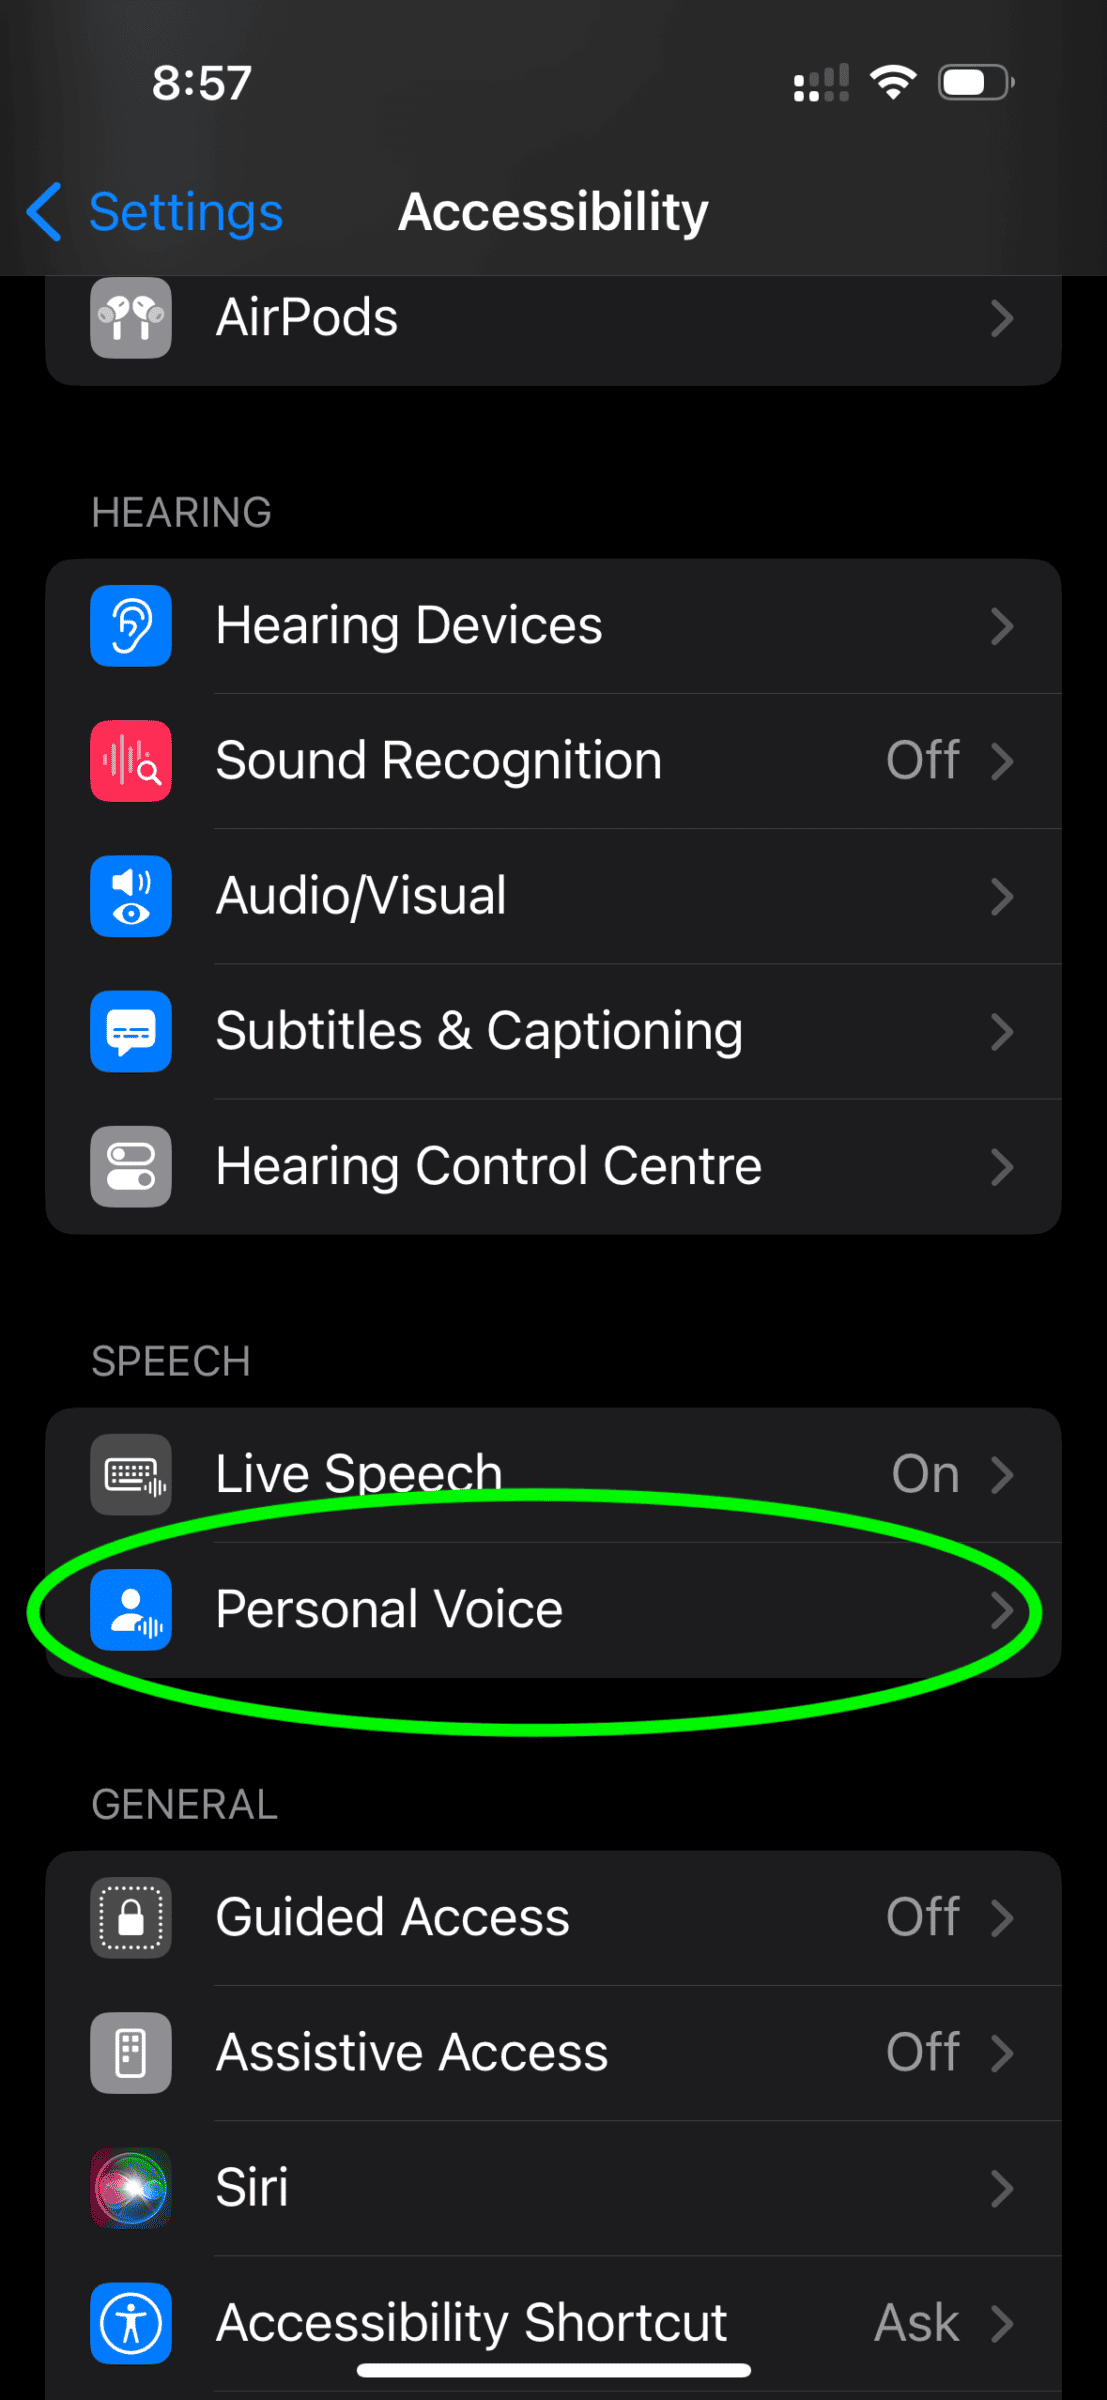 A screenshot of the Accessibility menu on an iPhone with the Personal Voice menu item circled in green.